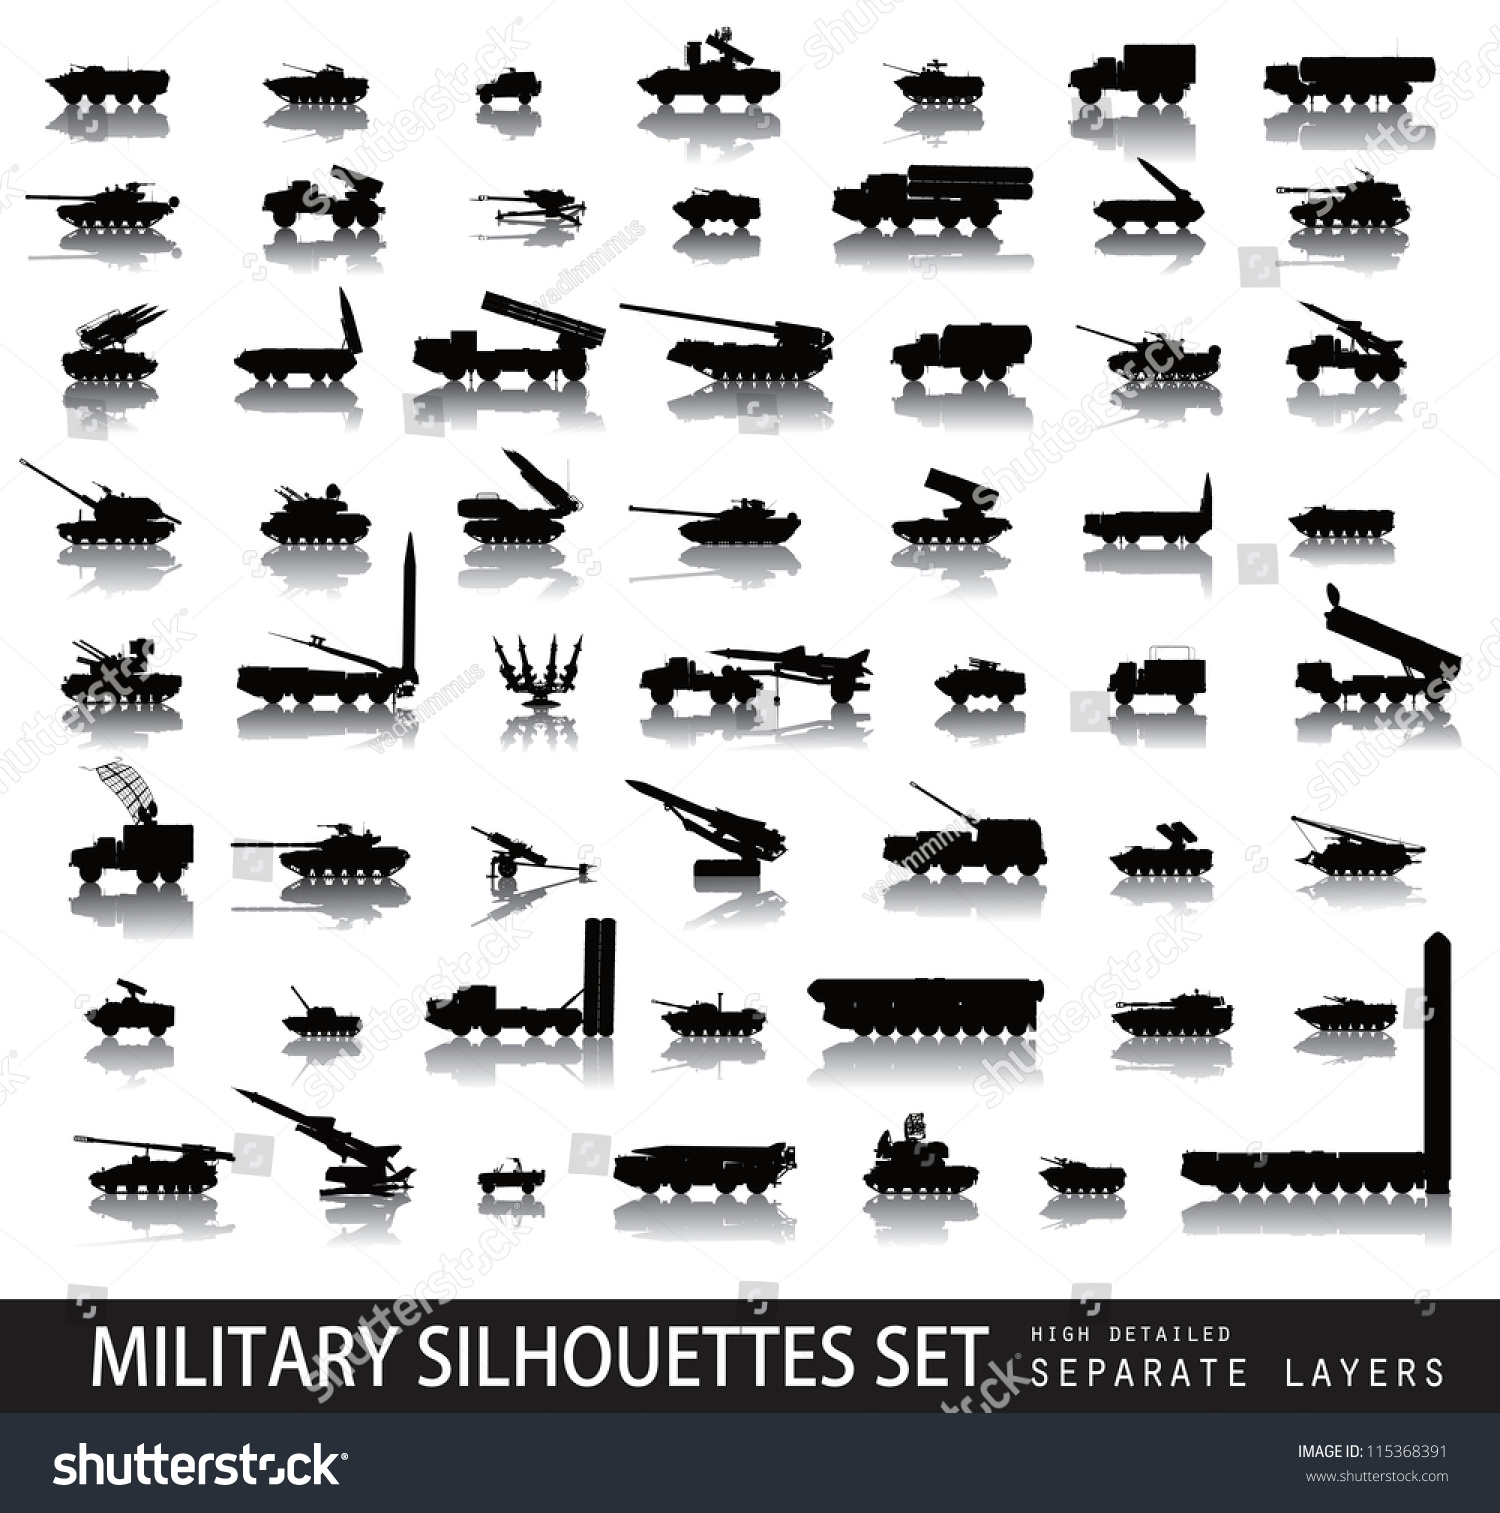 military clipart collection - photo #36